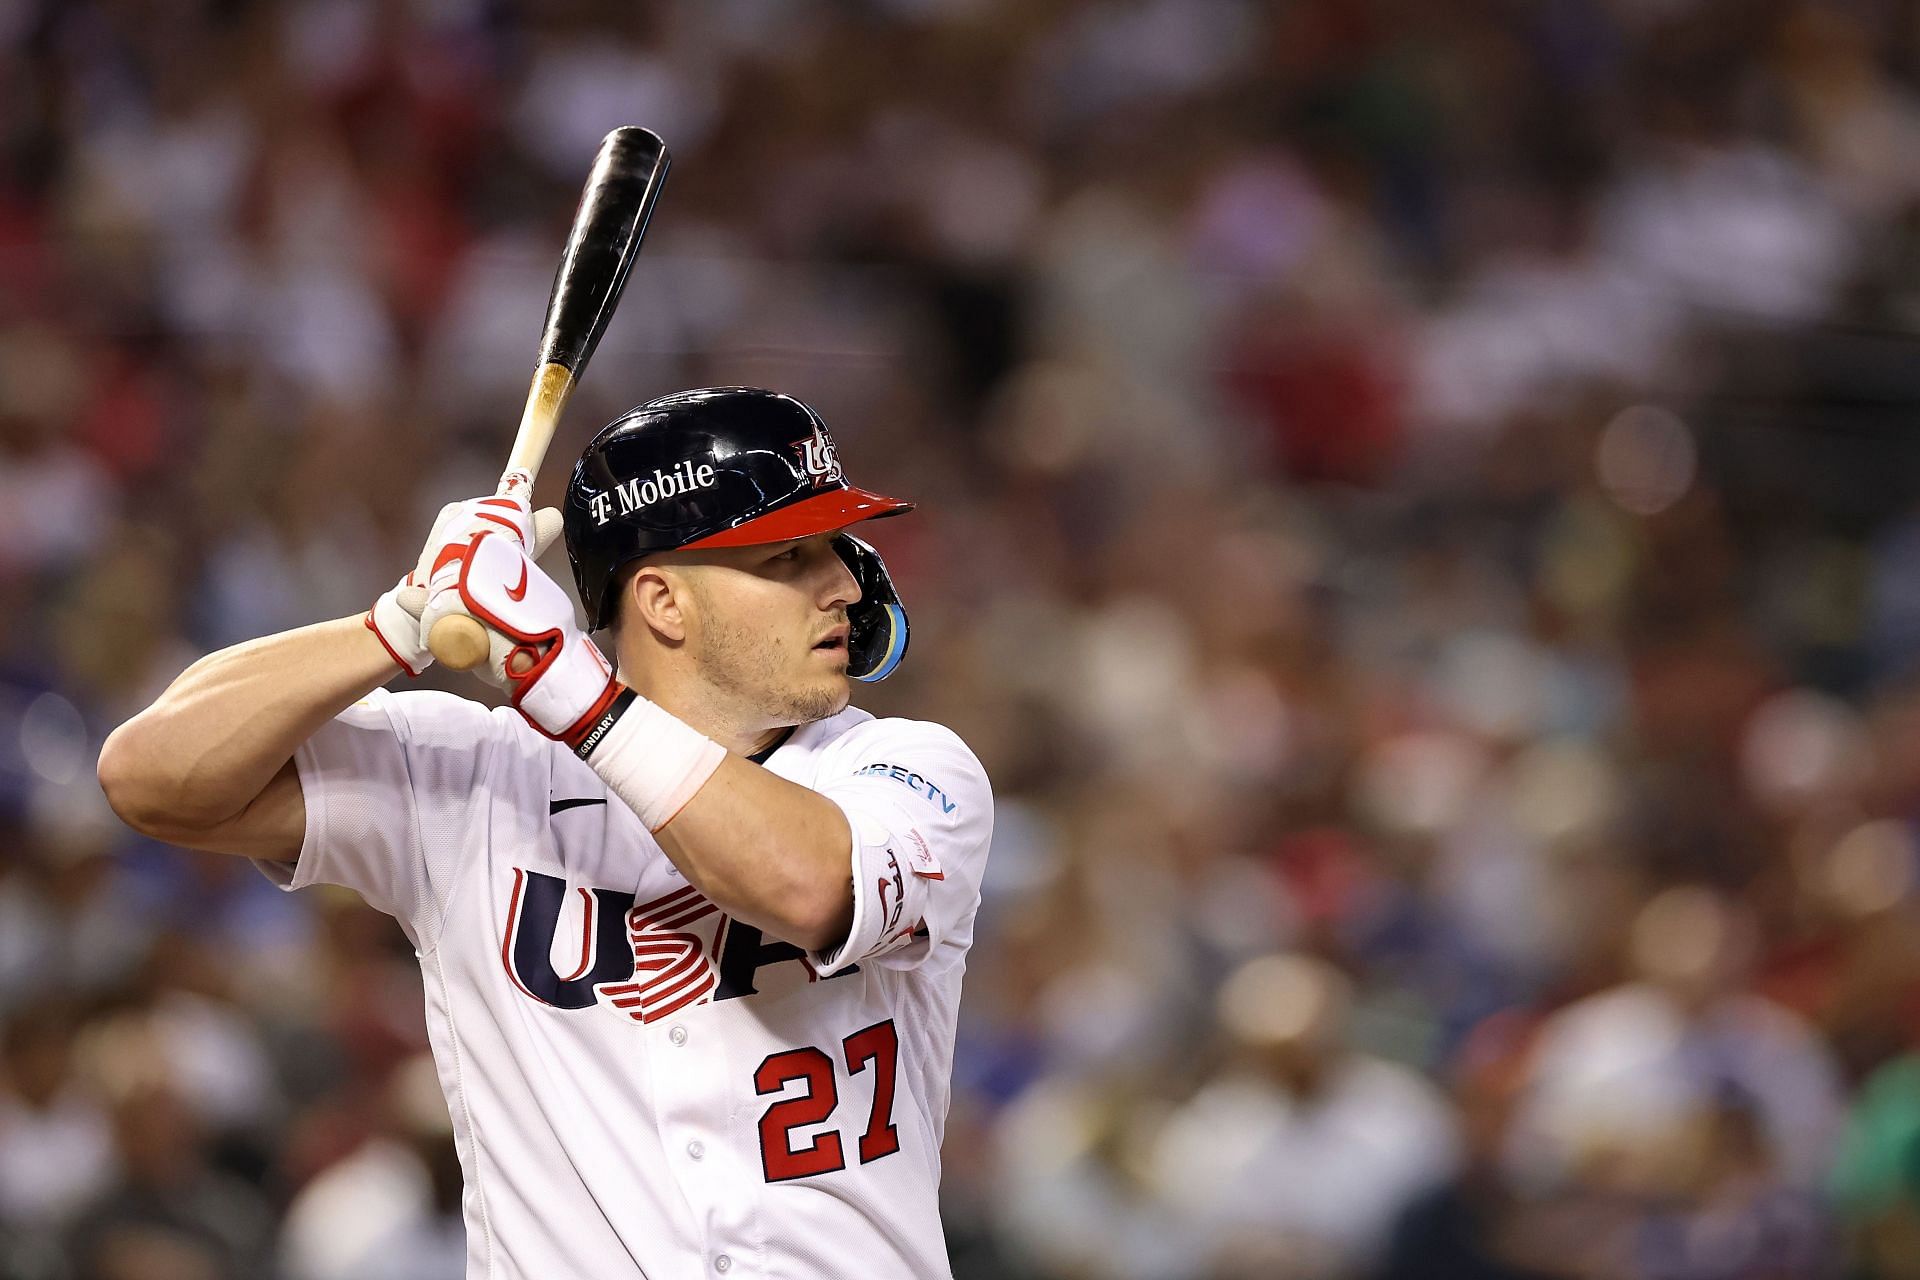 World Baseball Classic Pool C: Great Britain v United States: PHOENIX, ARIZONA - MARCH 11: Mike Trout #27 of Team USA bats against Team Great Britain during the World Baseball Classic Pool C game at Chase Field on March 11, 2023, in Phoenix, Arizona. Team USA defeated Team Great Britain 6-2. (Photo by Christian Petersen/Getty Images)